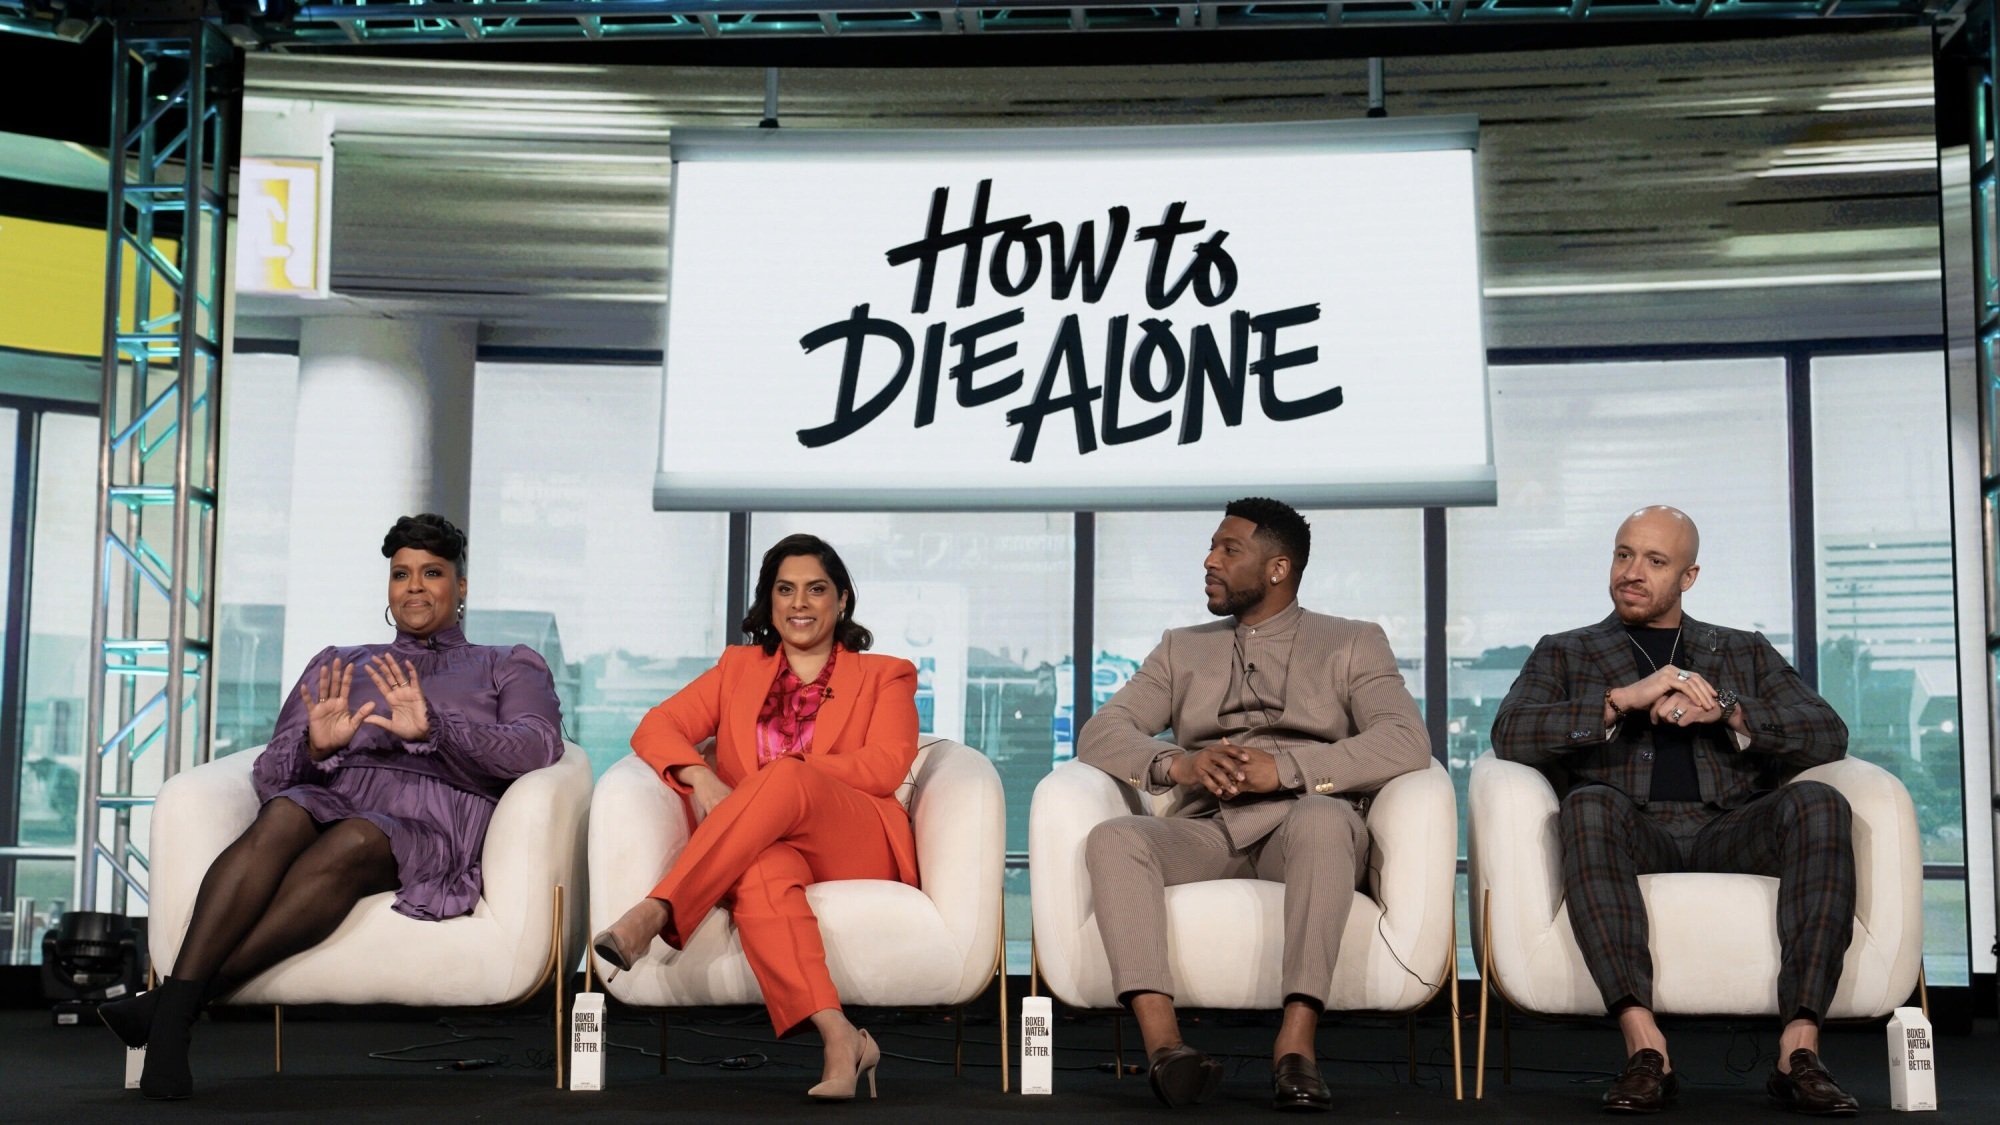 The cast and creators of "How to Die Alone" sit onstage at a press event.